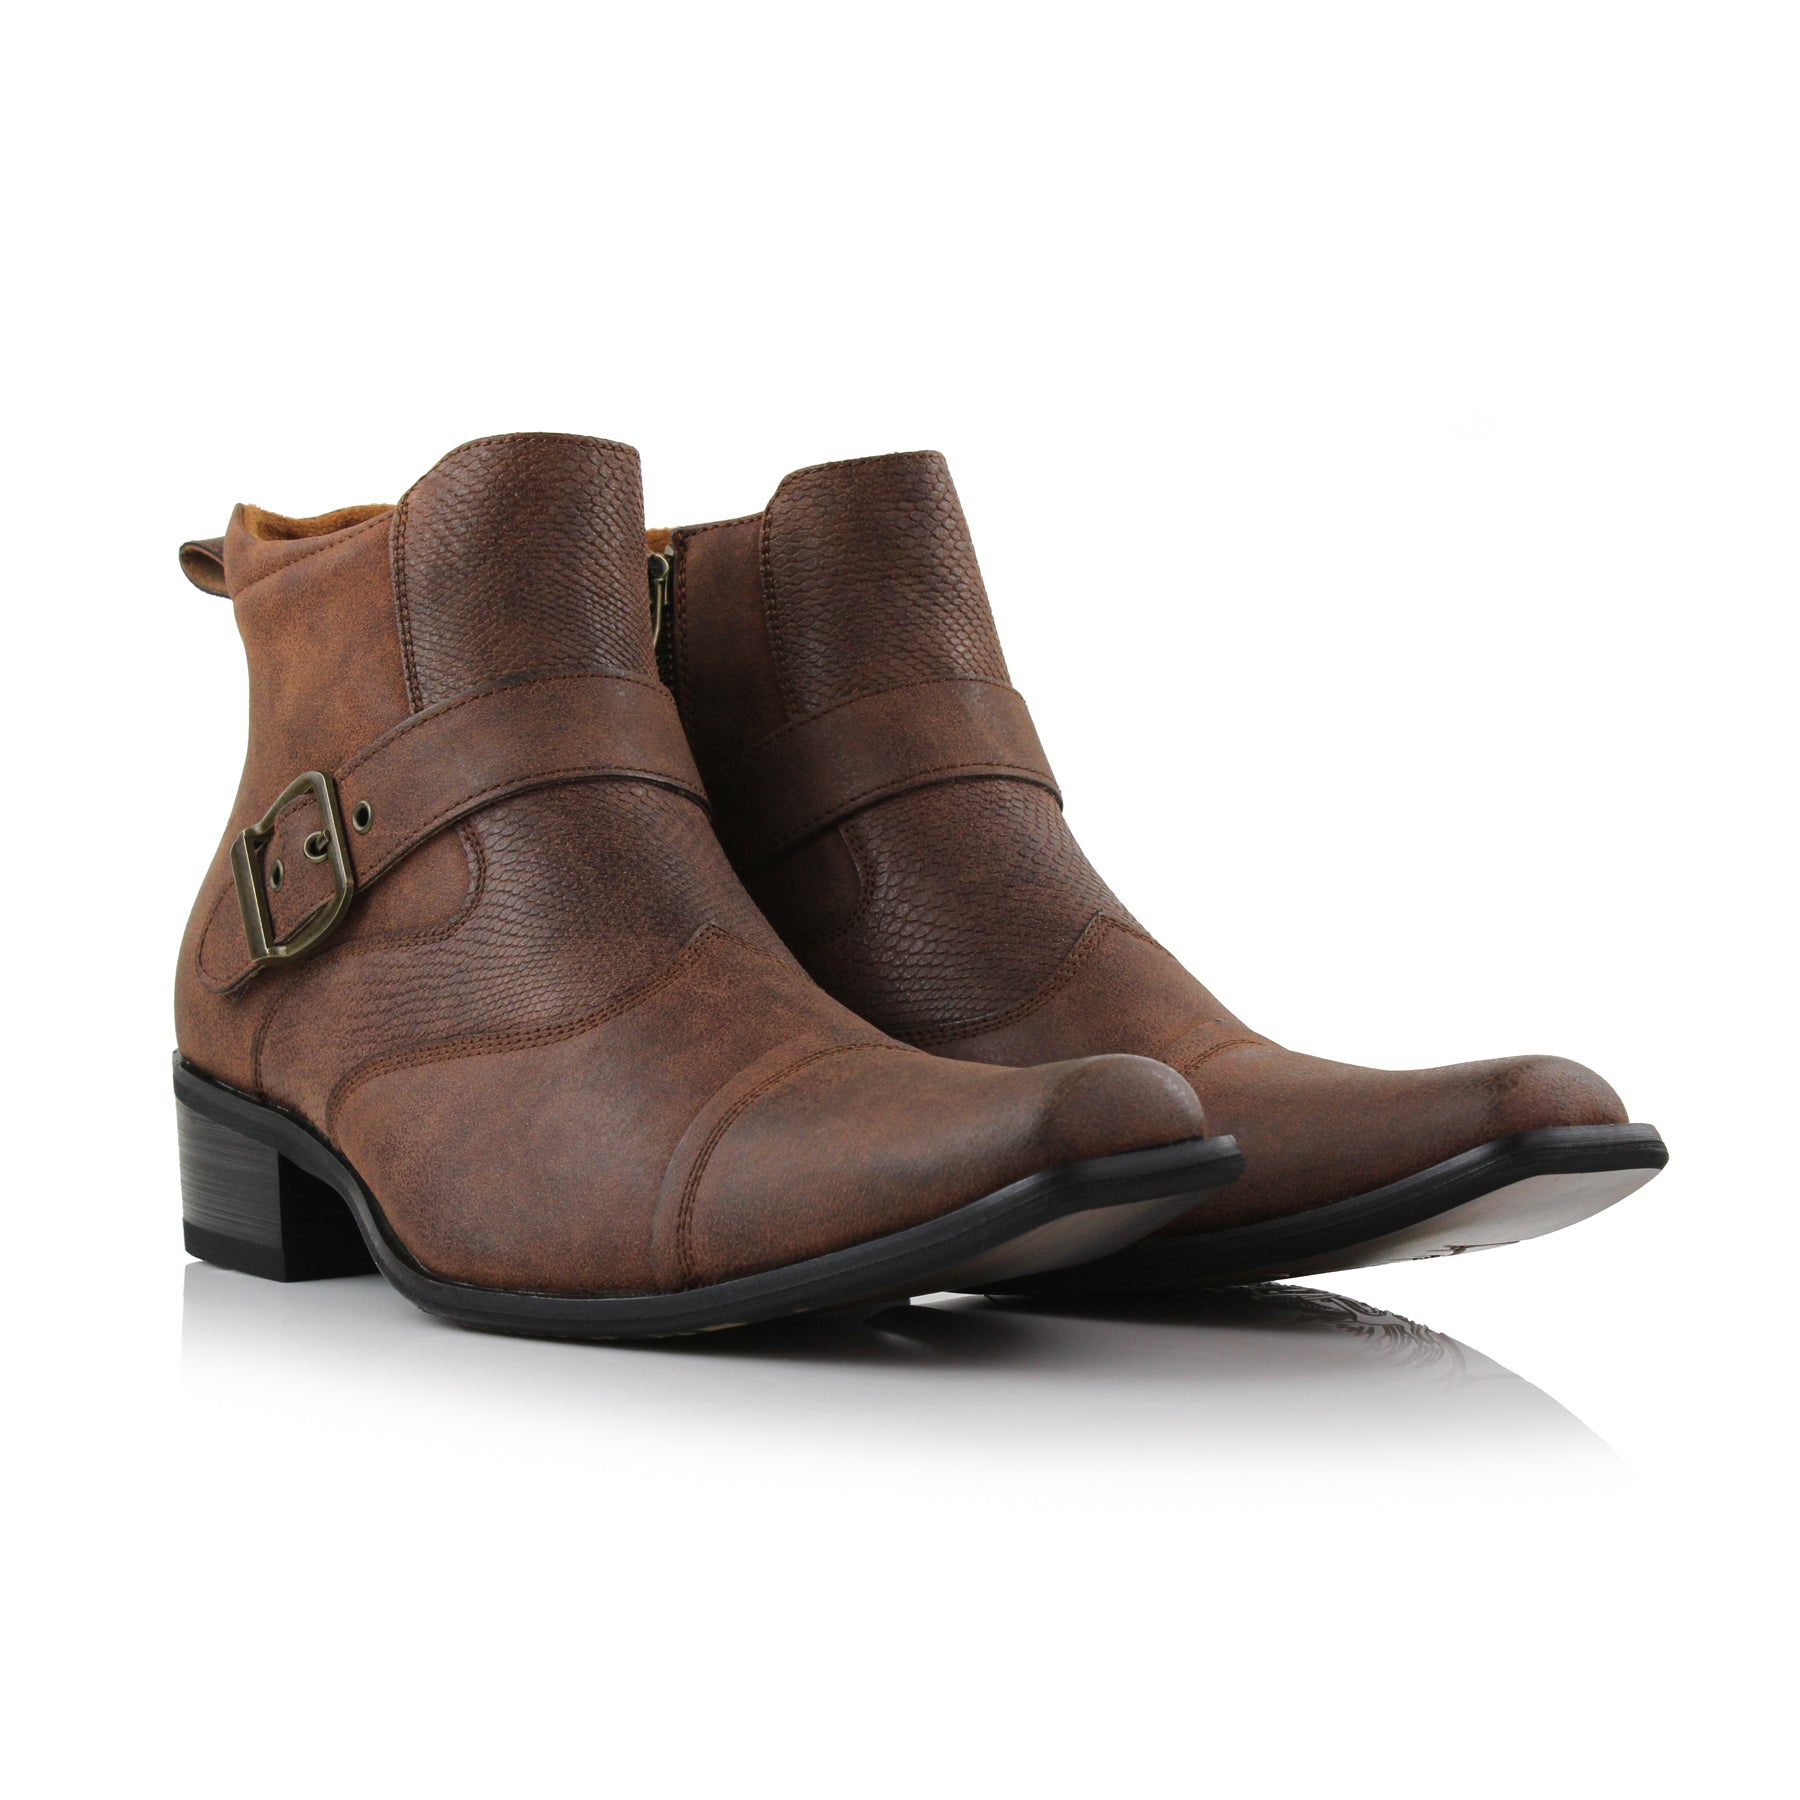 Snake Hide Embossed Cowboy Boots | Alejandro by Ferro Aldo | Conal Footwear | Paired Angle View